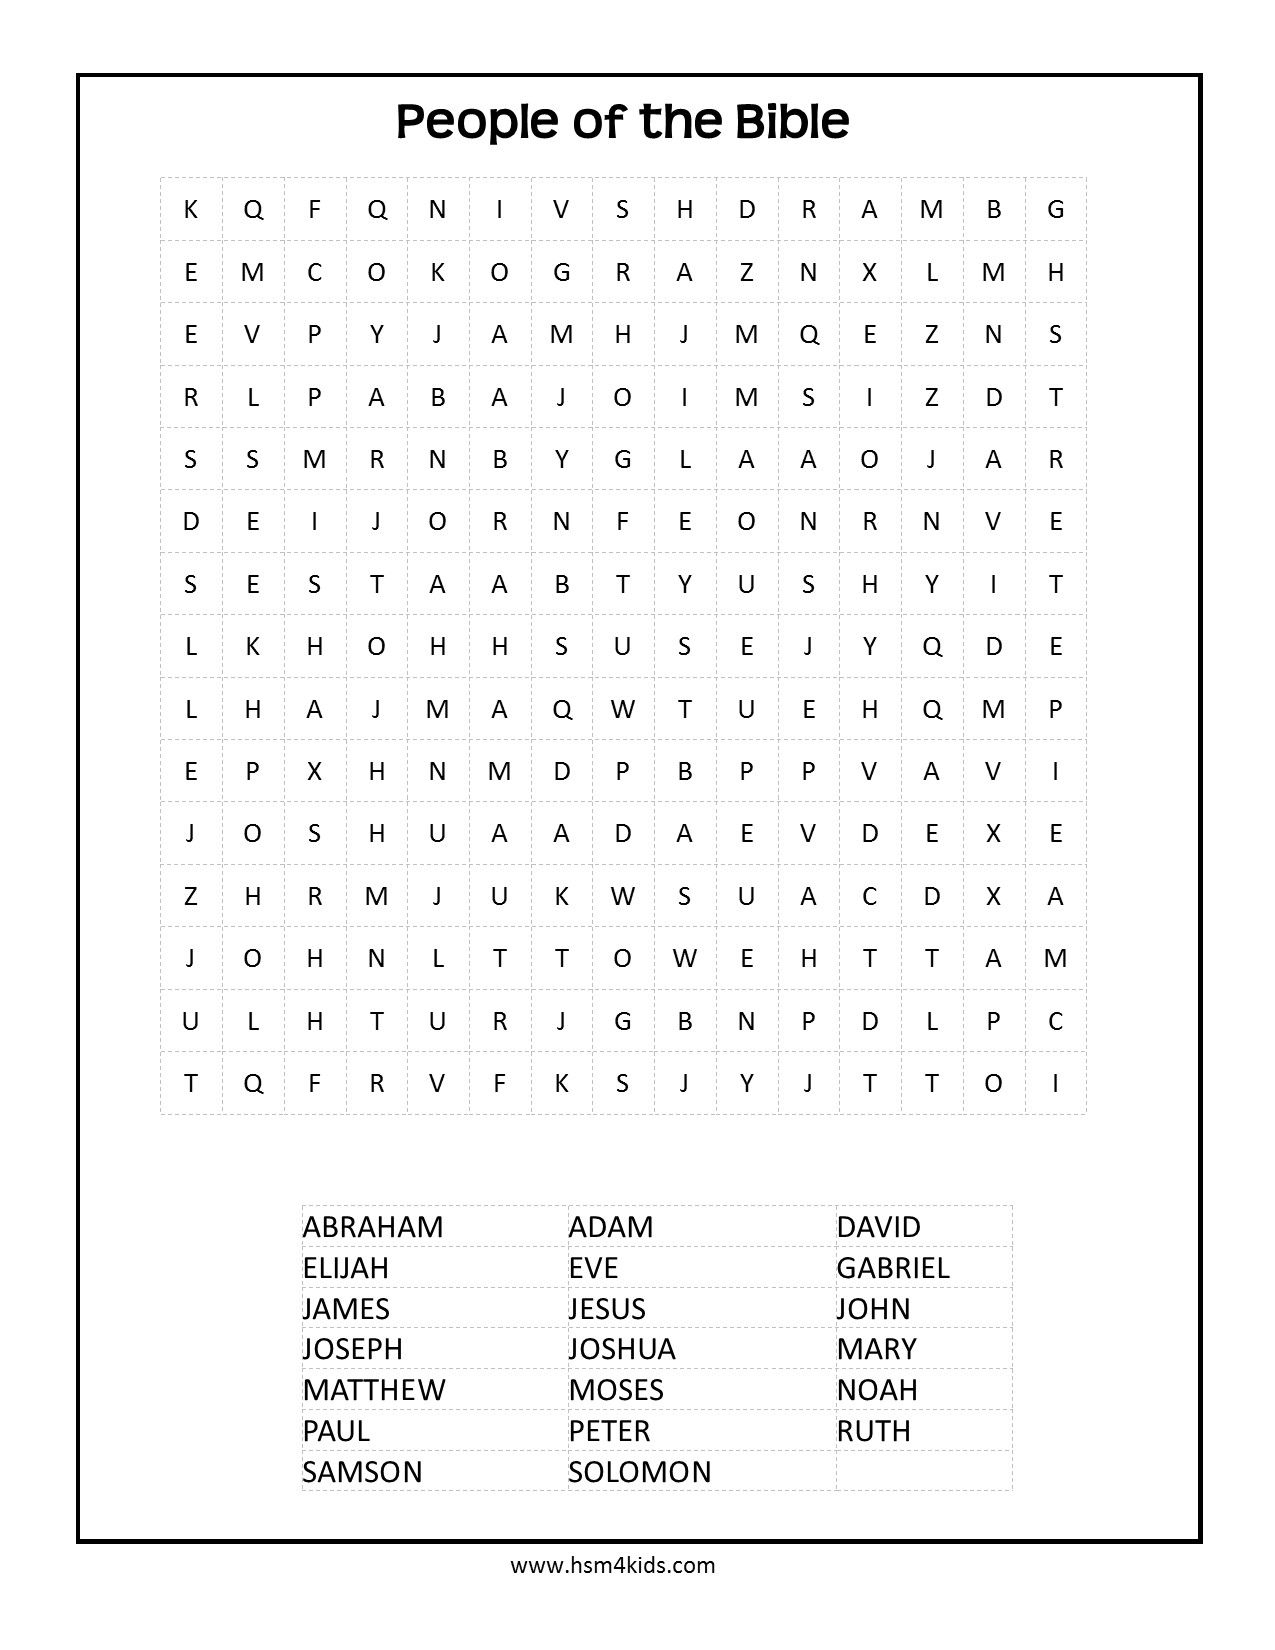 Free Bible Word Search For Kids. Free And Printable! | Kids - Bible Crossword Puzzles For Kids Free Printable